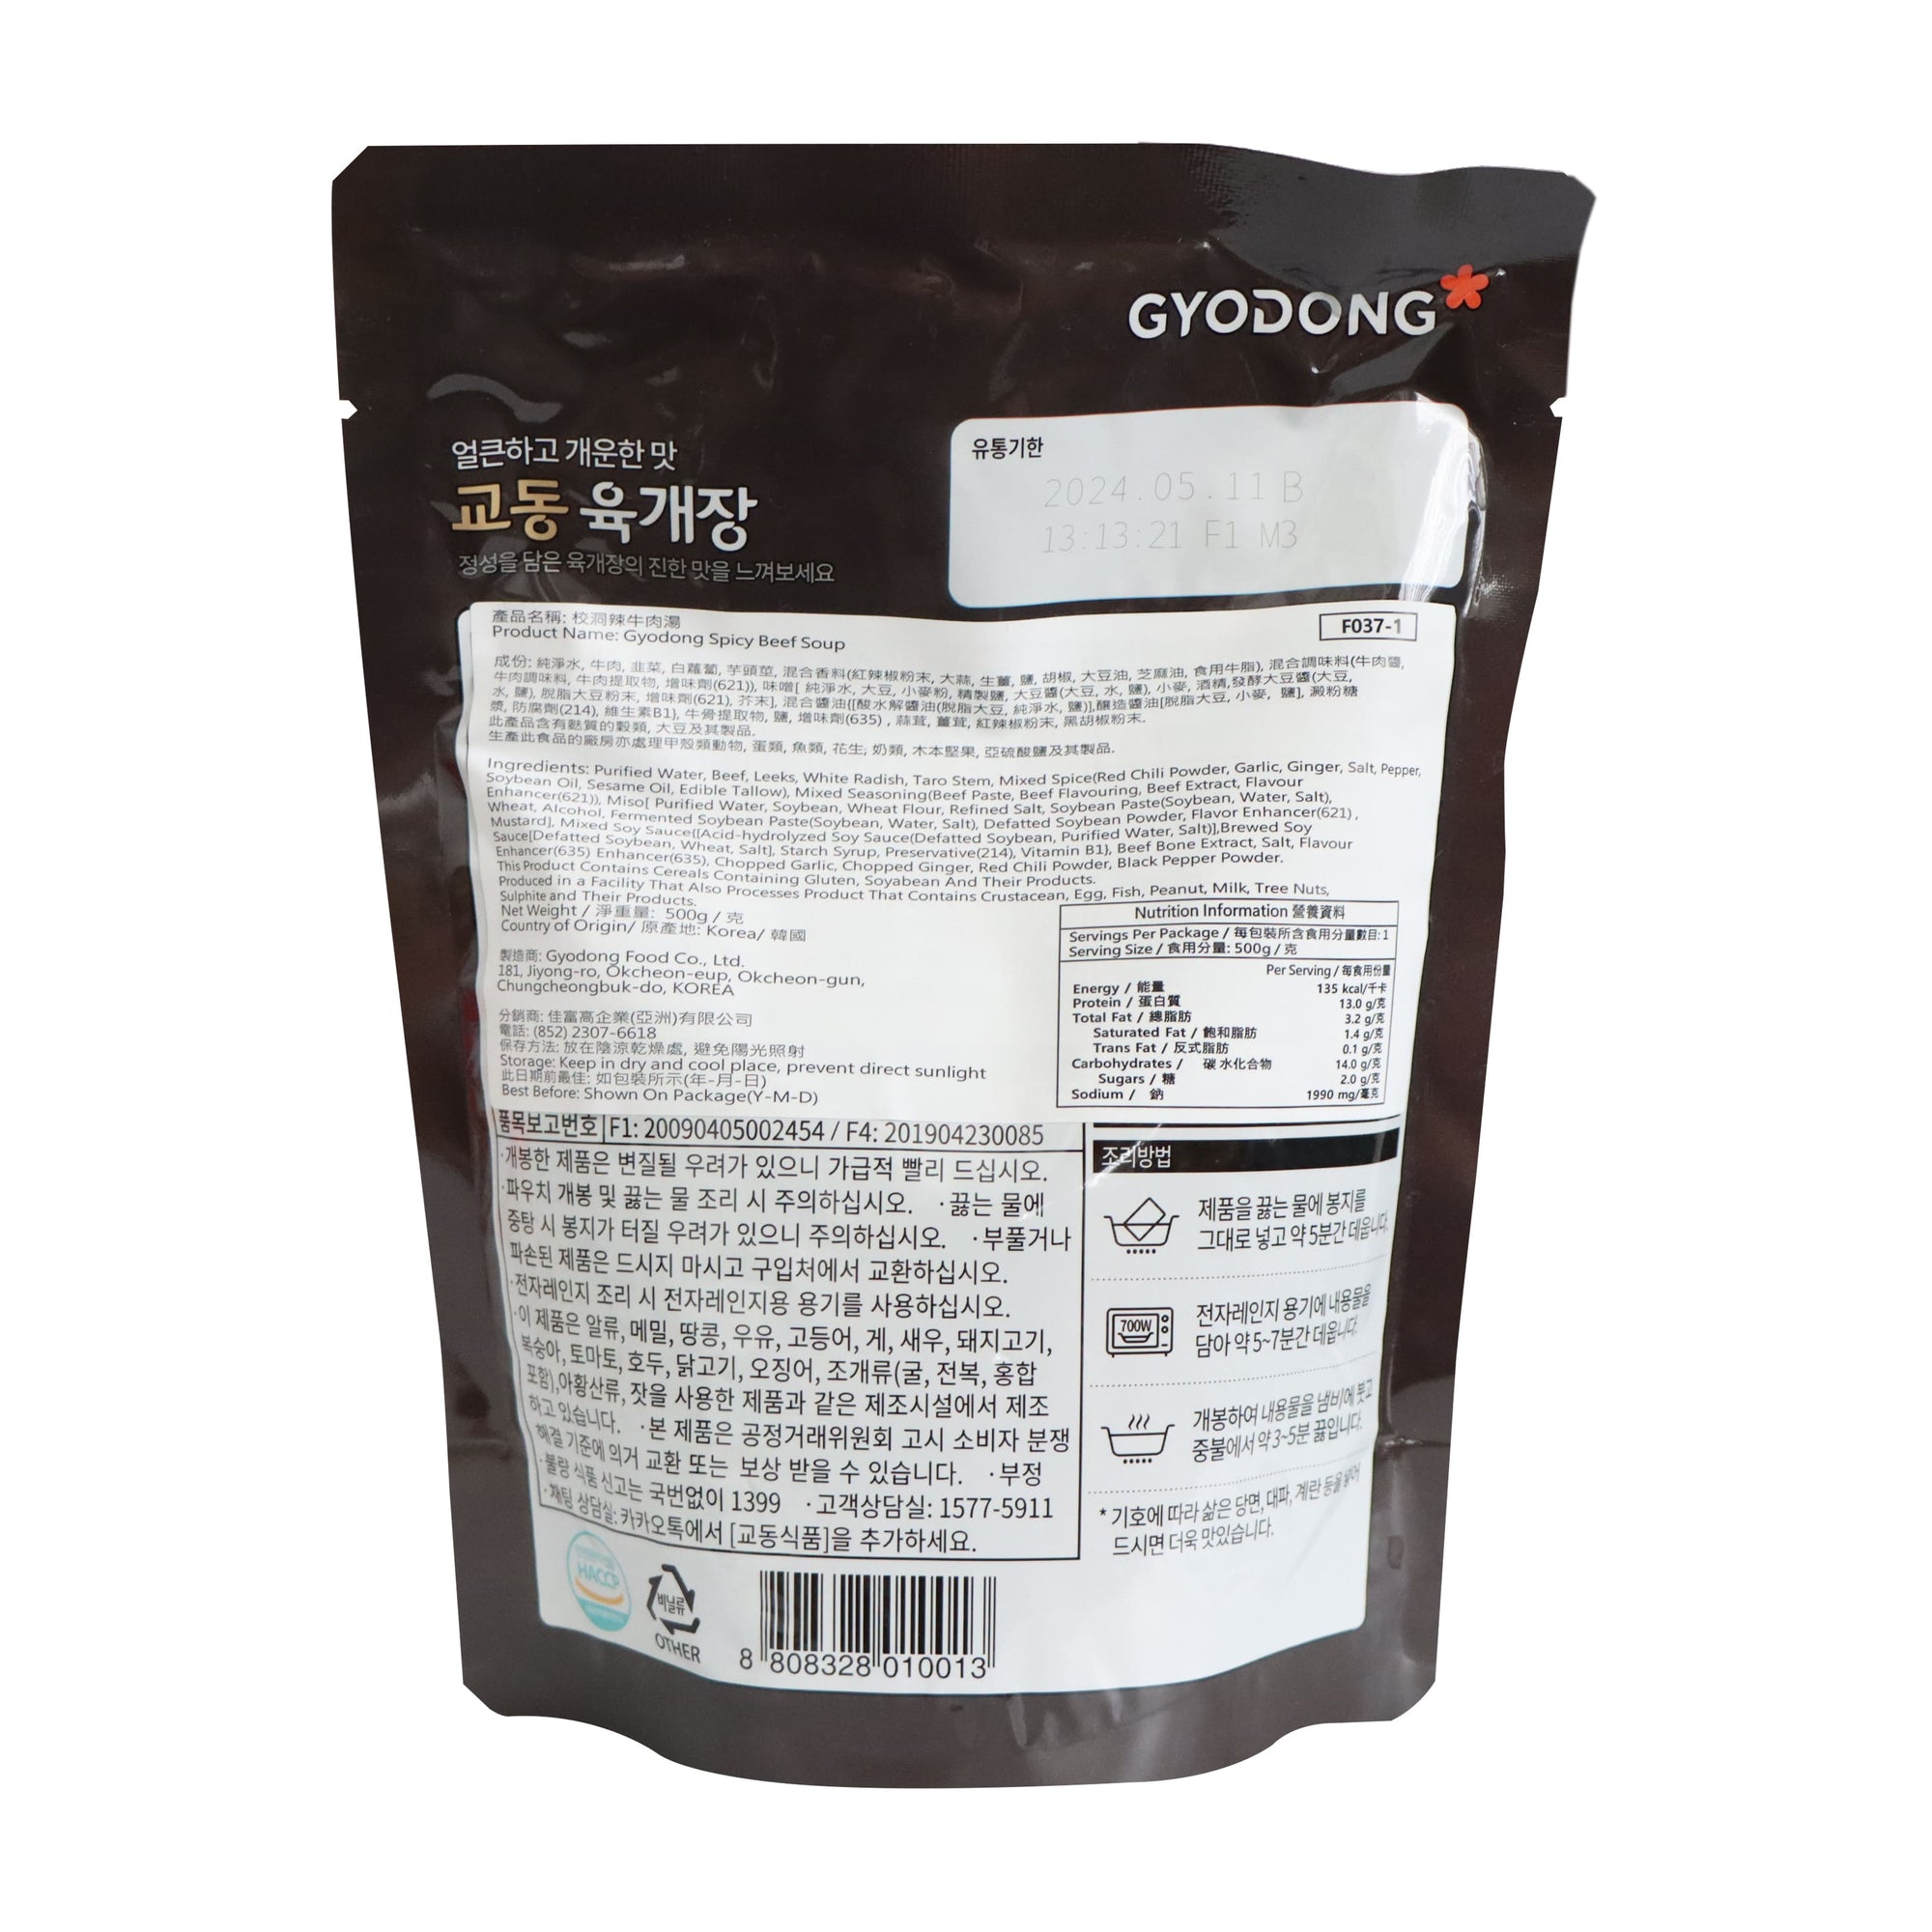 Gyodong Instant Spicy Beef Soup 500g